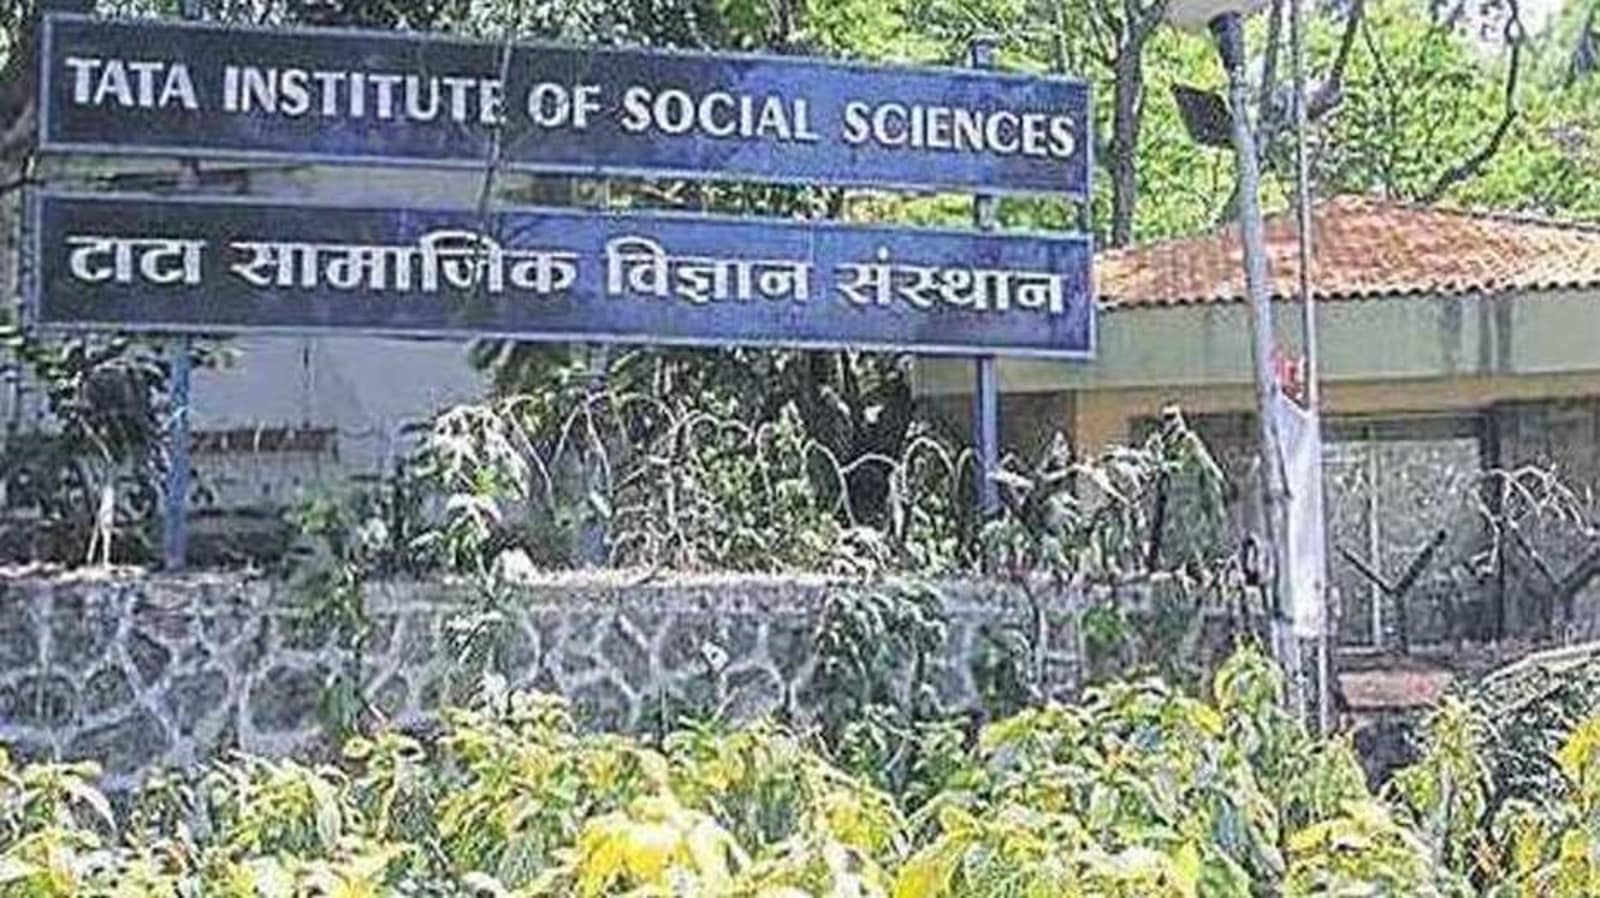 colleges-in-mumbai-set-to-reopen-tiss-still-undecided-hindustan-times